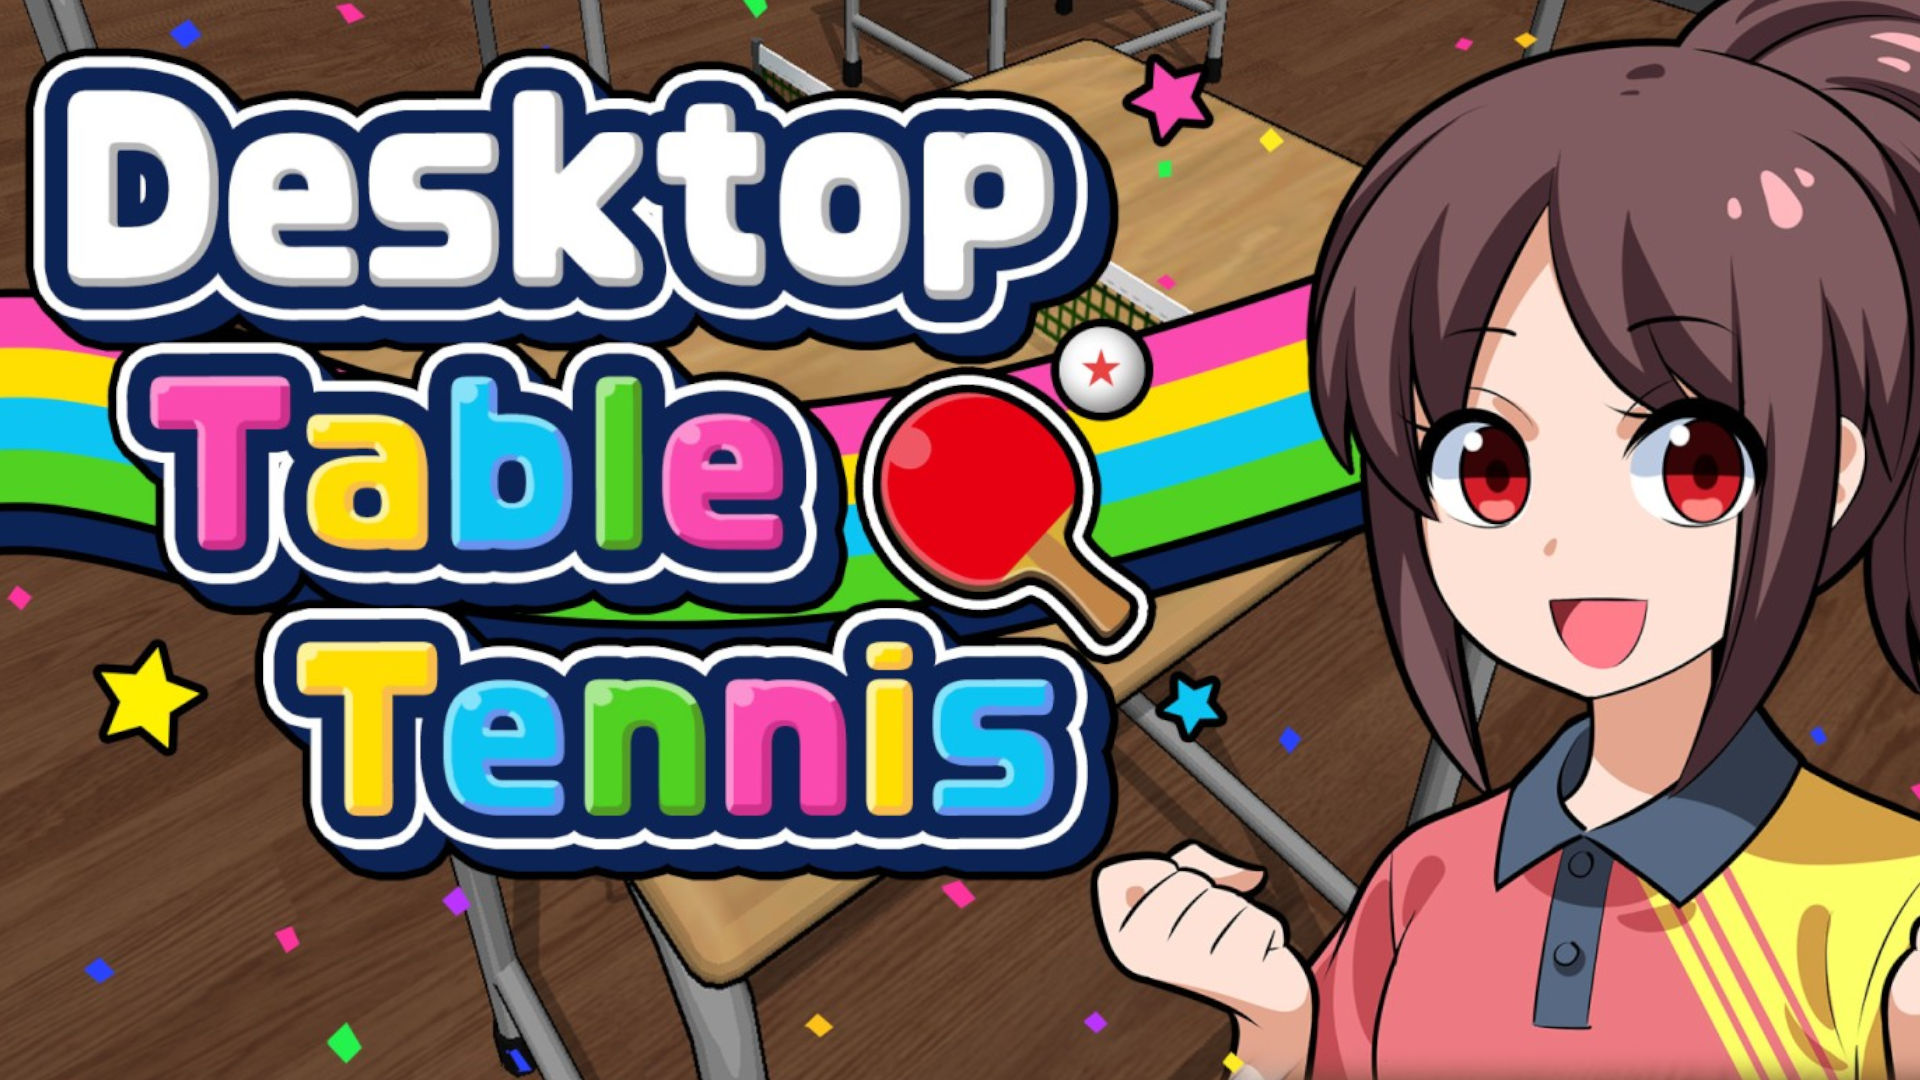 Cover art for Desktop Table Tennis, one of the arcade-style ping pong games on Switch